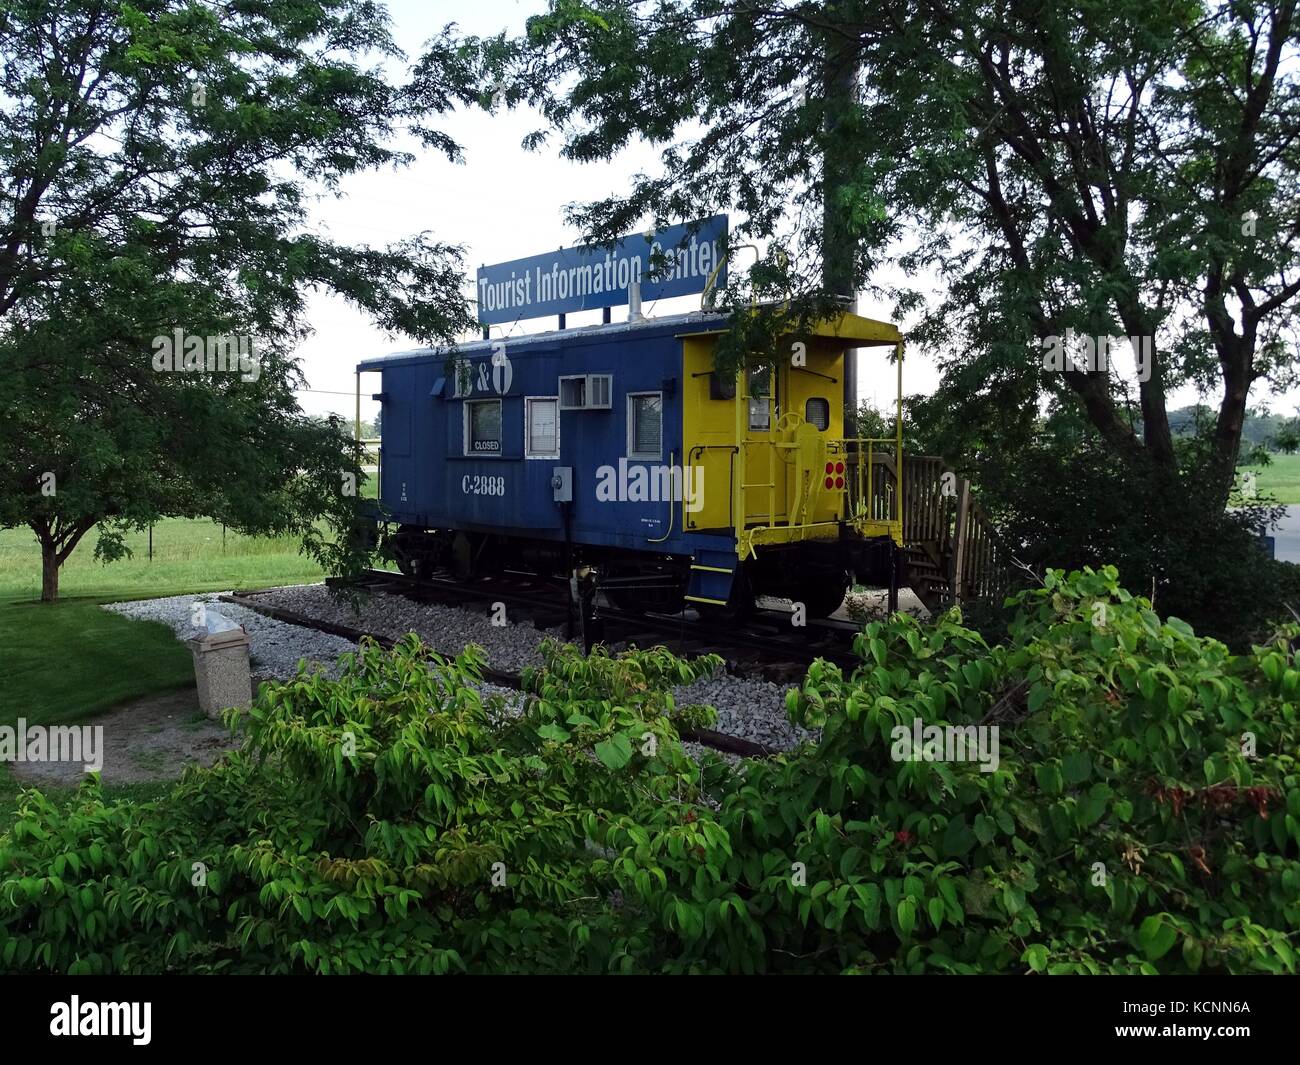 Lima, Ohio, United States-July 7, 2017:  A tourist information center located in a B&O railway carriage Stock Photo